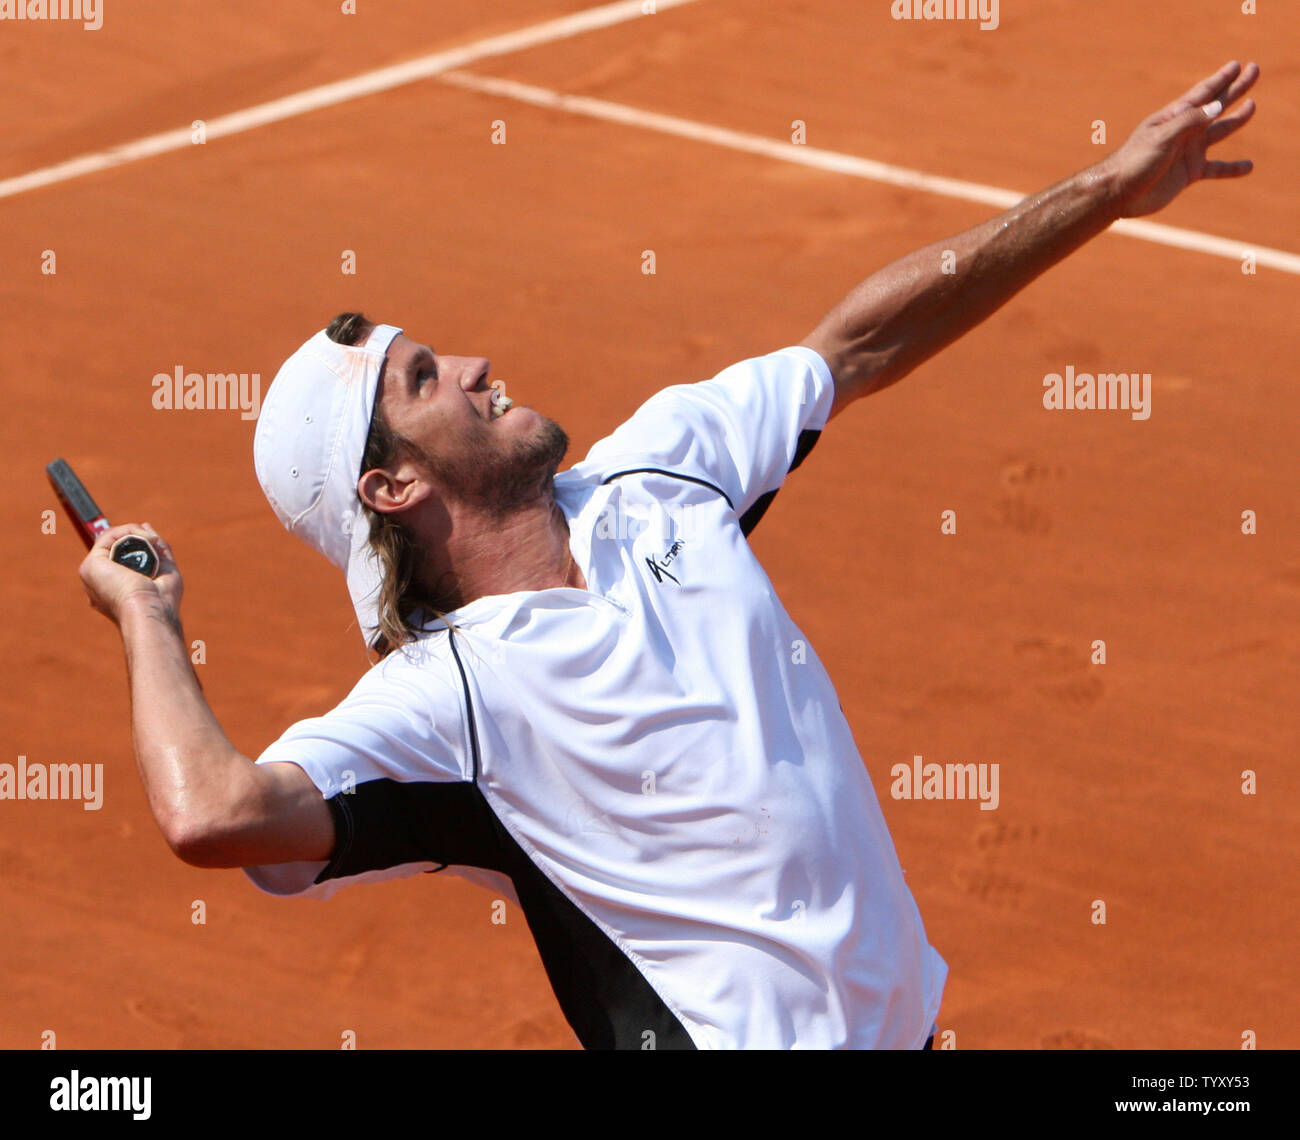 Argentinian Juan Pablo Brzezicki prepares to serve during his third round match against Spaniard Carlos Moya at the French Open at Roland Garros in Paris on June 2, 2007.  Moya, the number 23 seed, defeated the unseeded Brzezicki in straight sets 6-1, 6-3, 7-5.   (UPI Photo/ David Silpa) Stock Photo